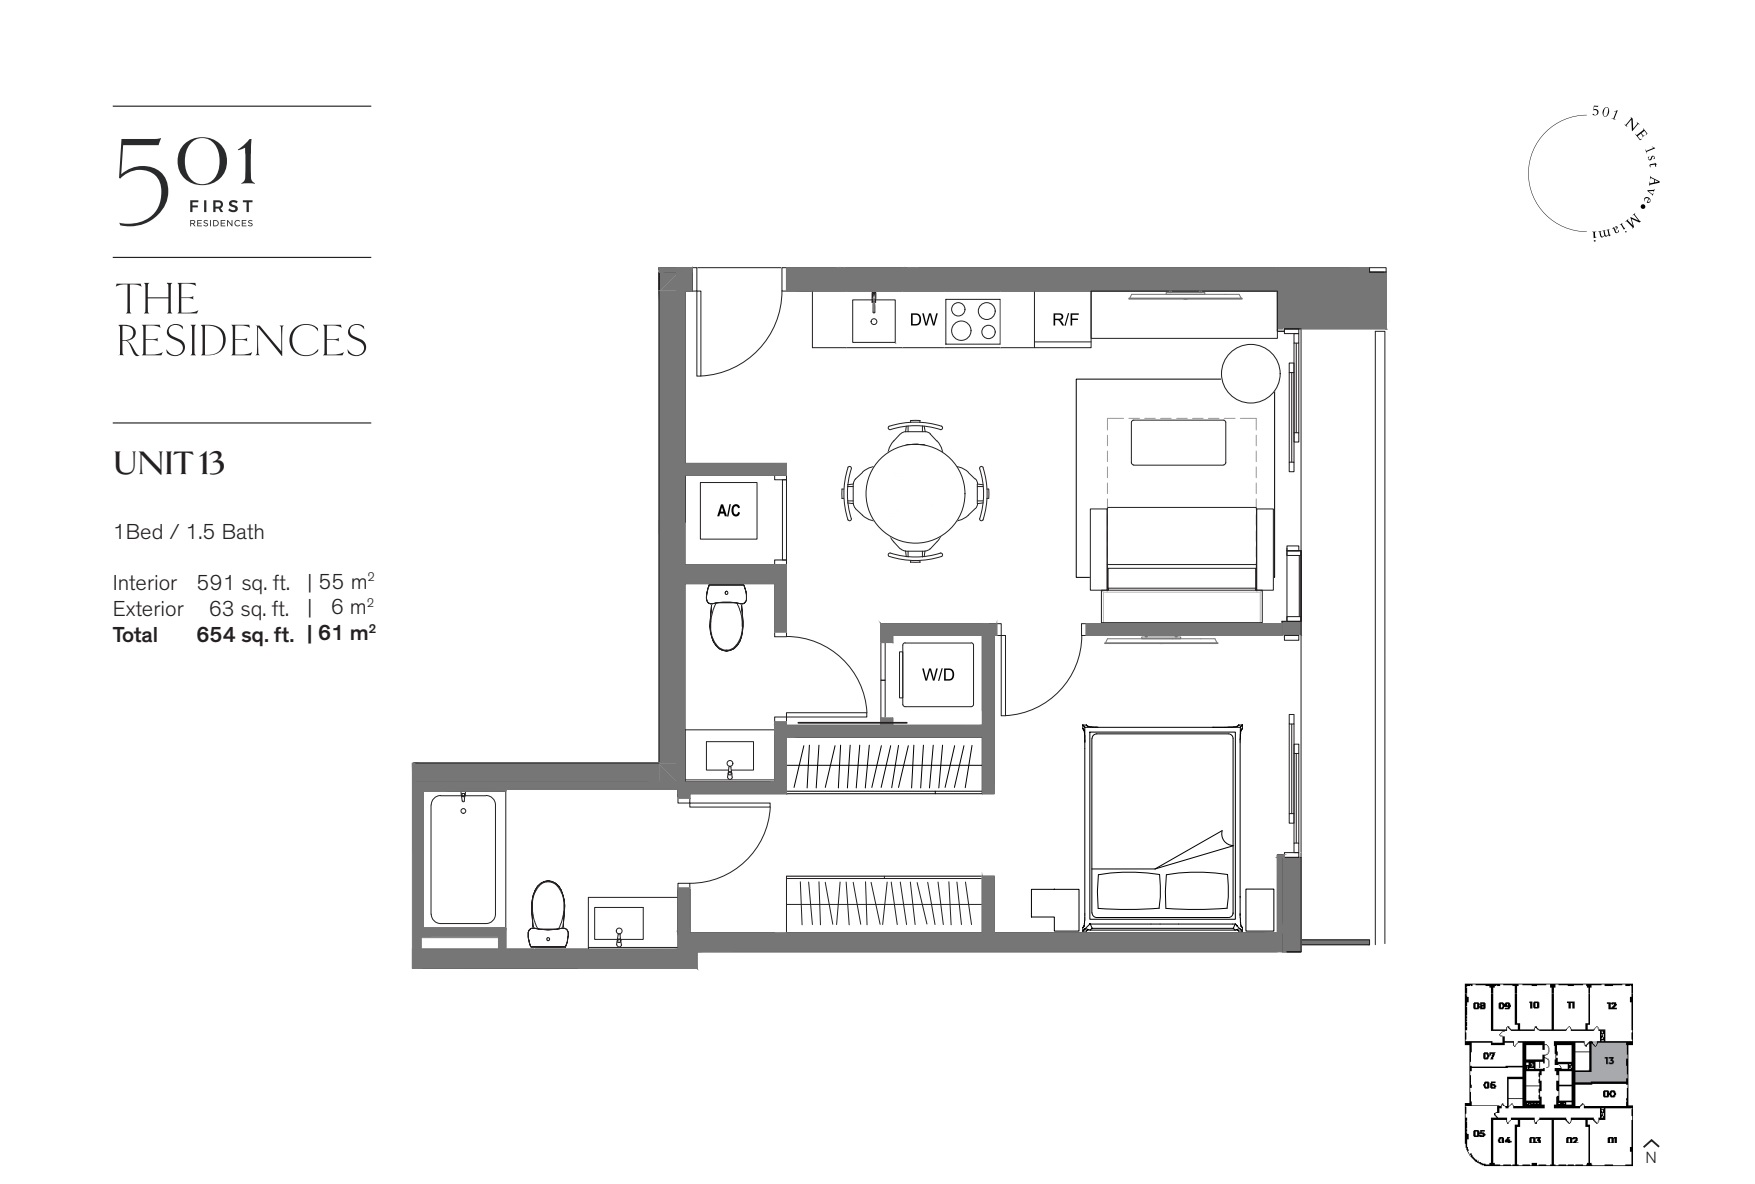 501 FIRST Residences Unit 13